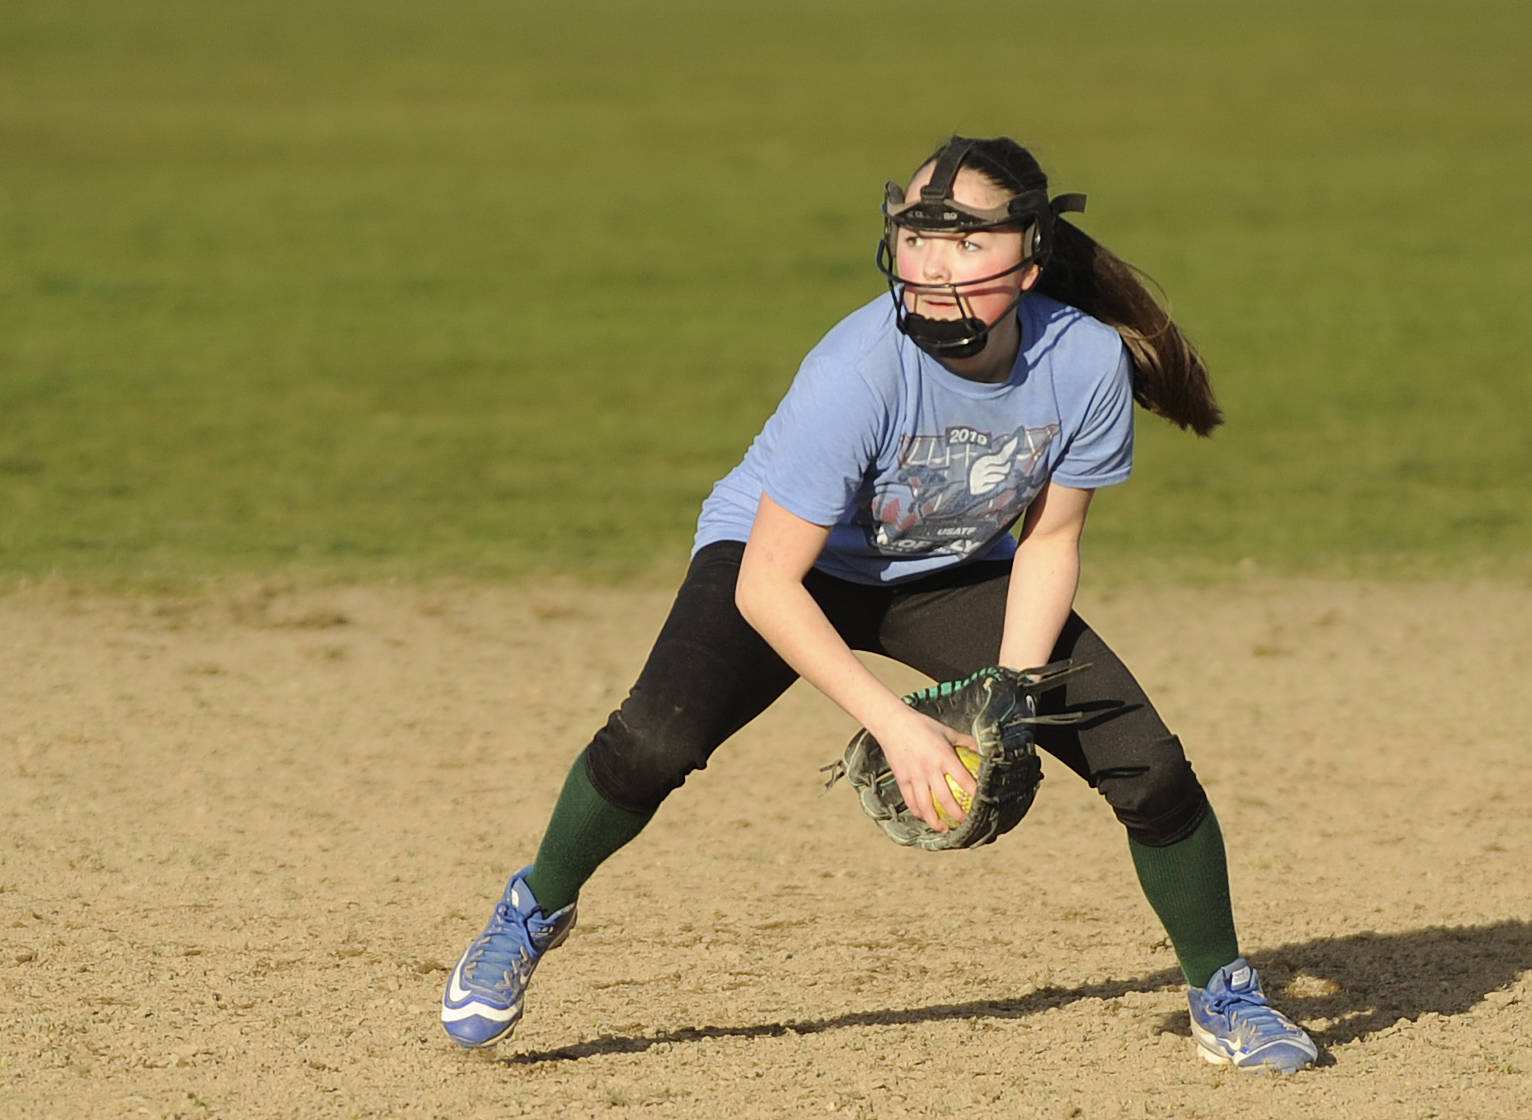 Sequim High freshman shortstop Hannah Bates looks to make a play at a preseason practice in early March. Bates and the Wolves saw their 2020 spring season suspended before playing their first game in mi-March. Sequim Gazette file photo by Michael Dashiell